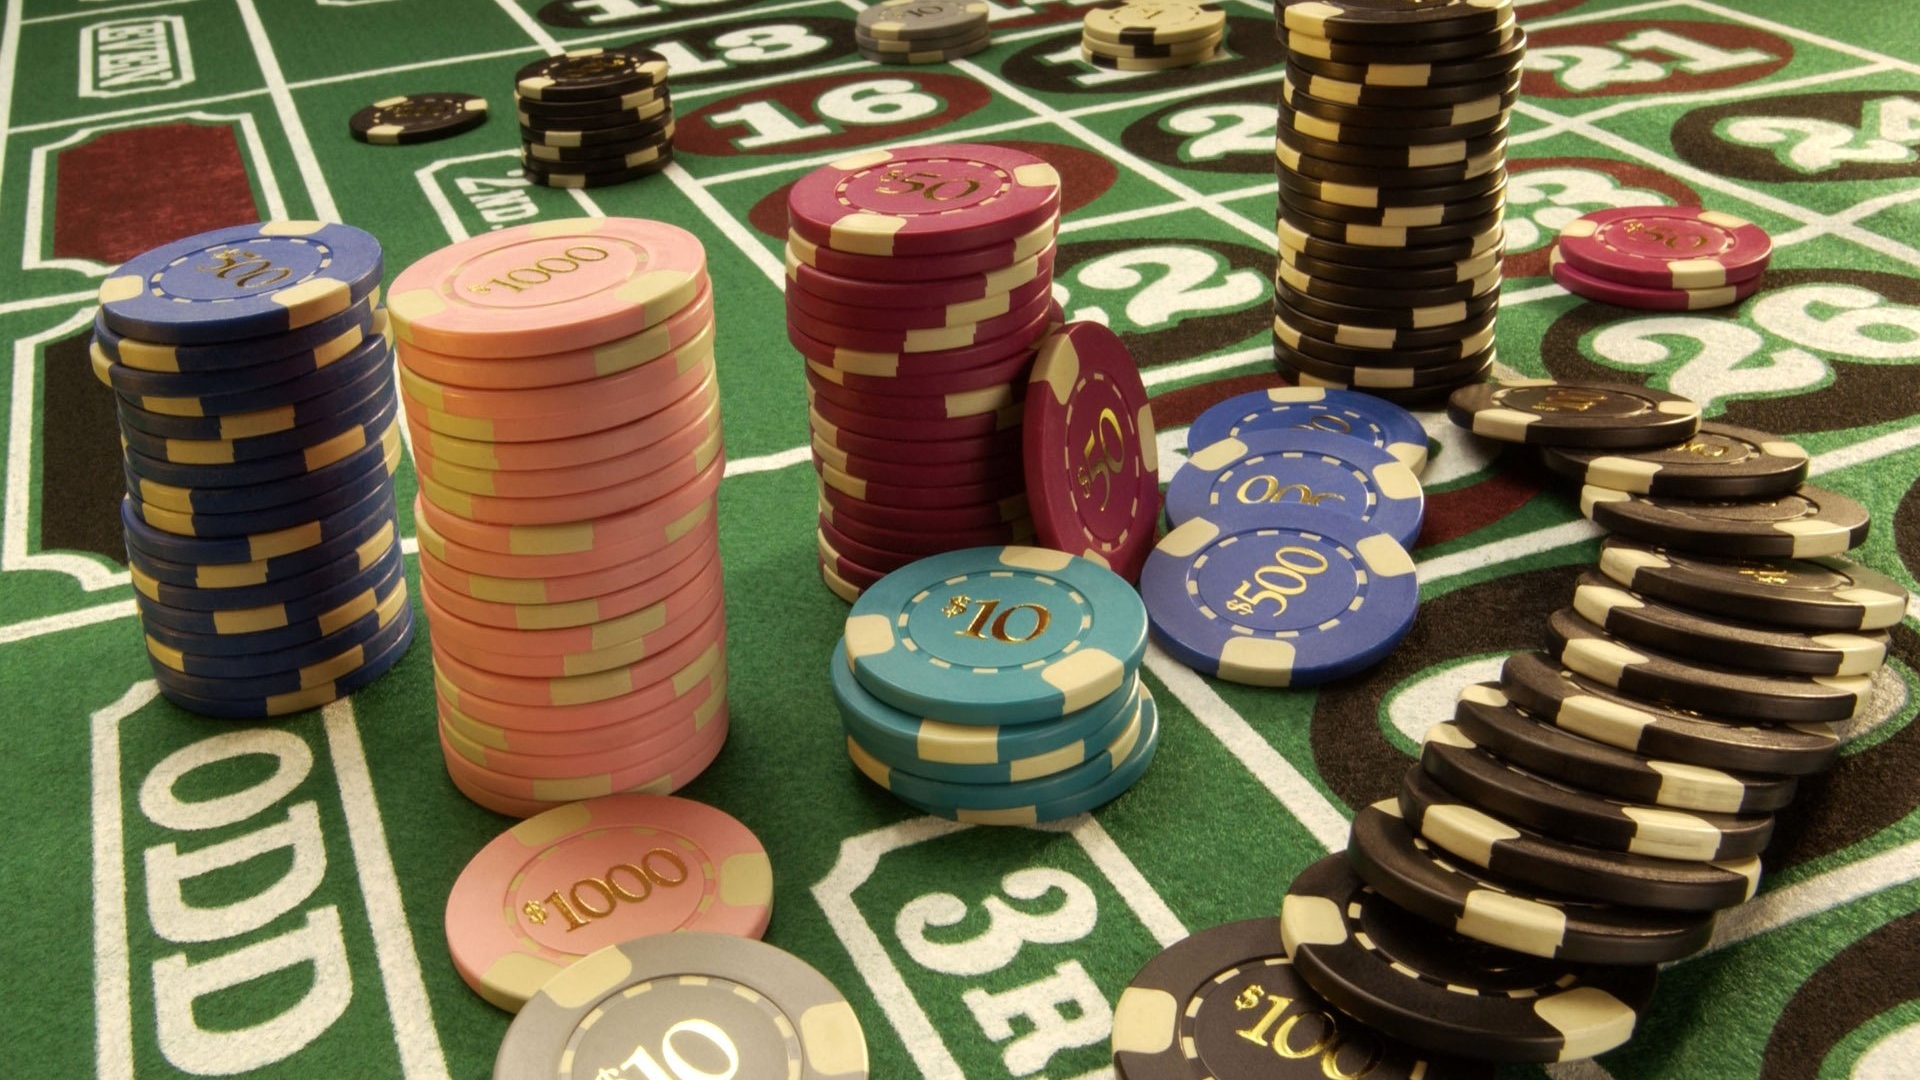 Now people can easily make money by playing at a casino online